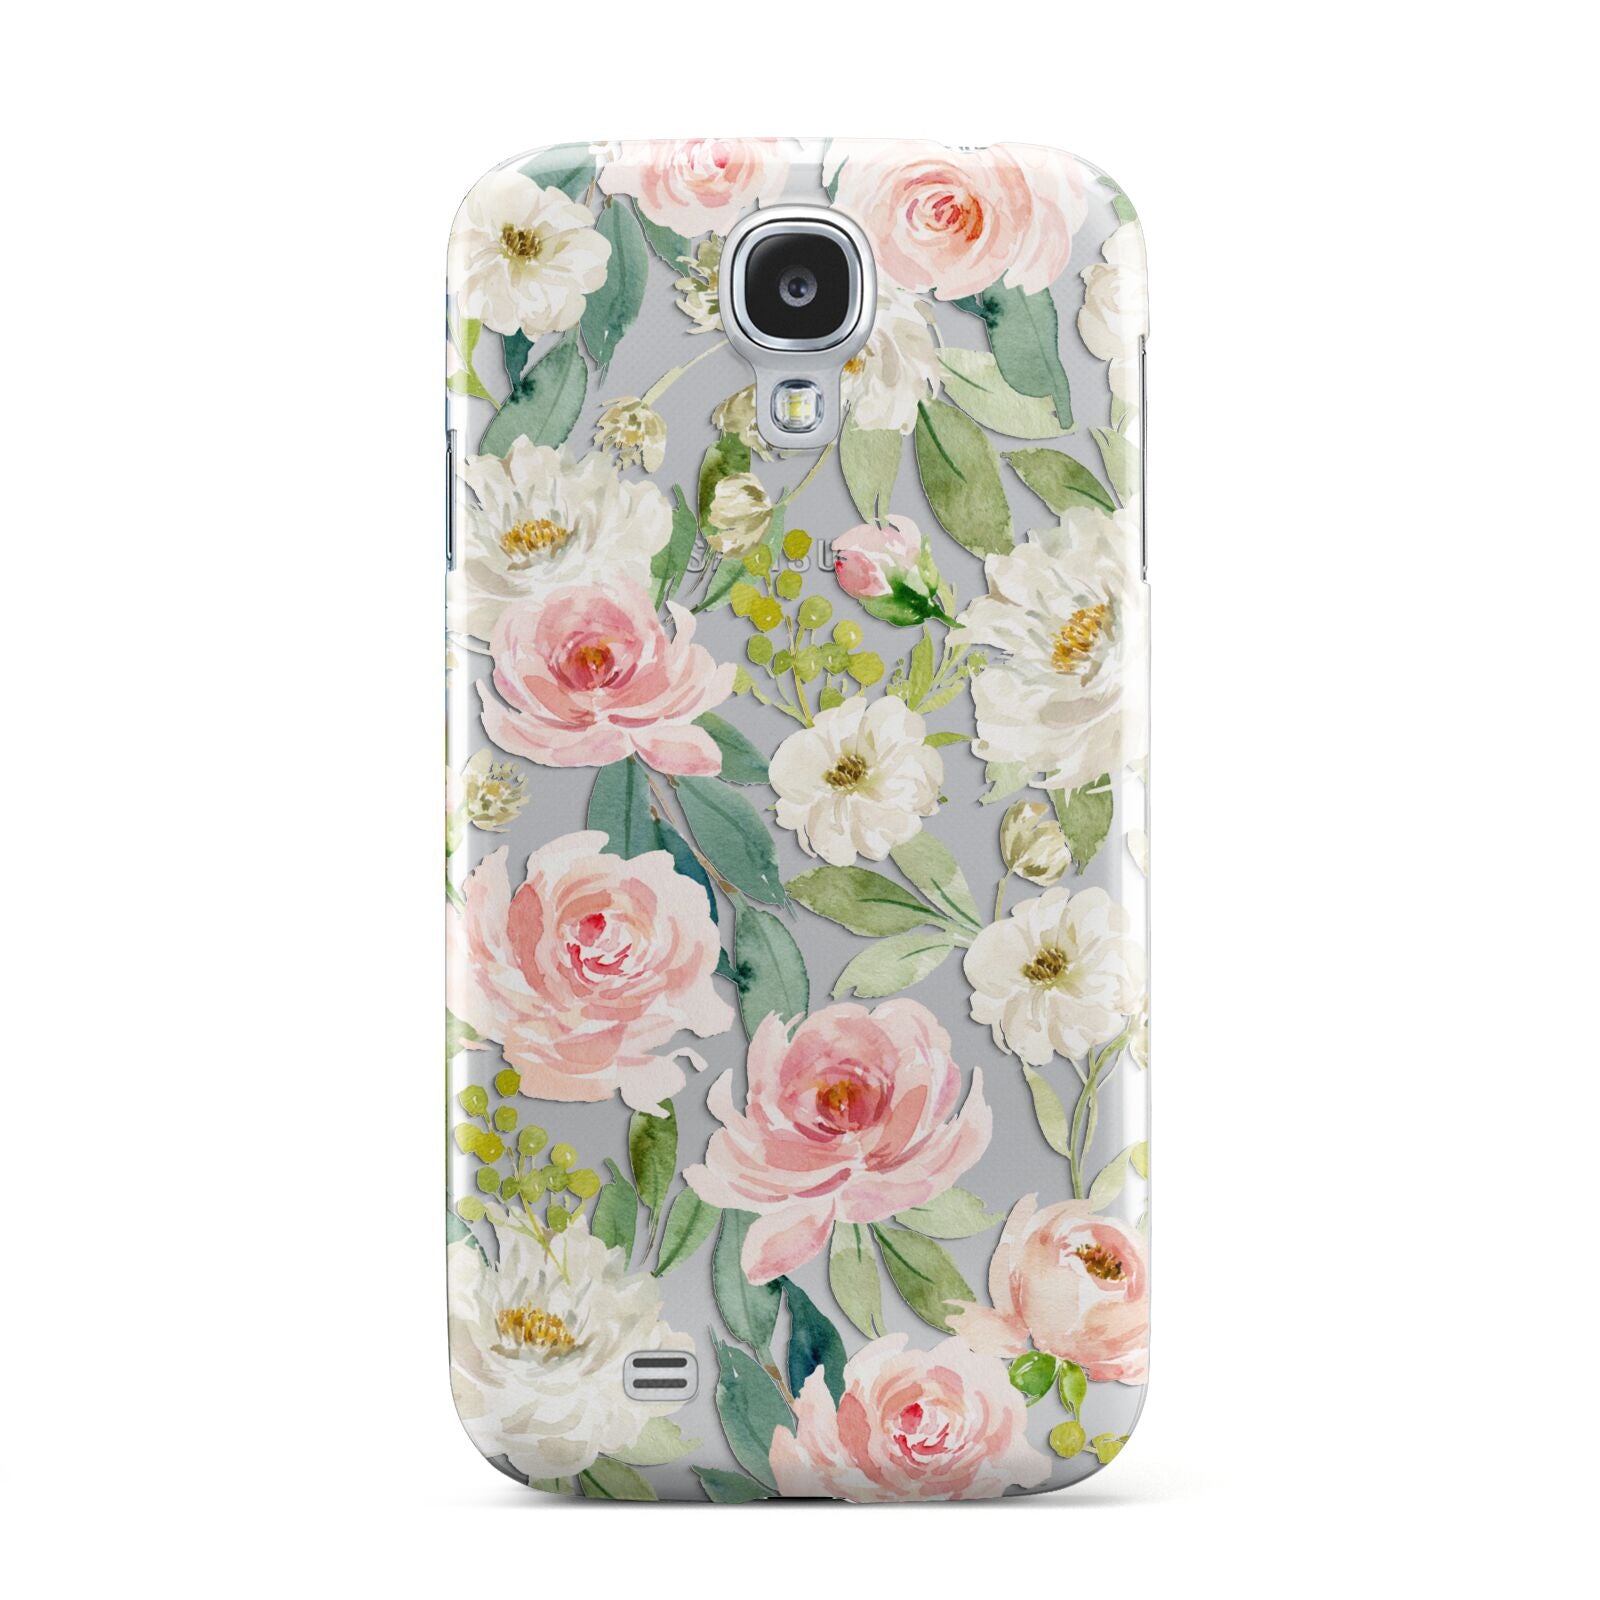 Watercolour Peonies Roses and Foliage Samsung Galaxy S4 Case